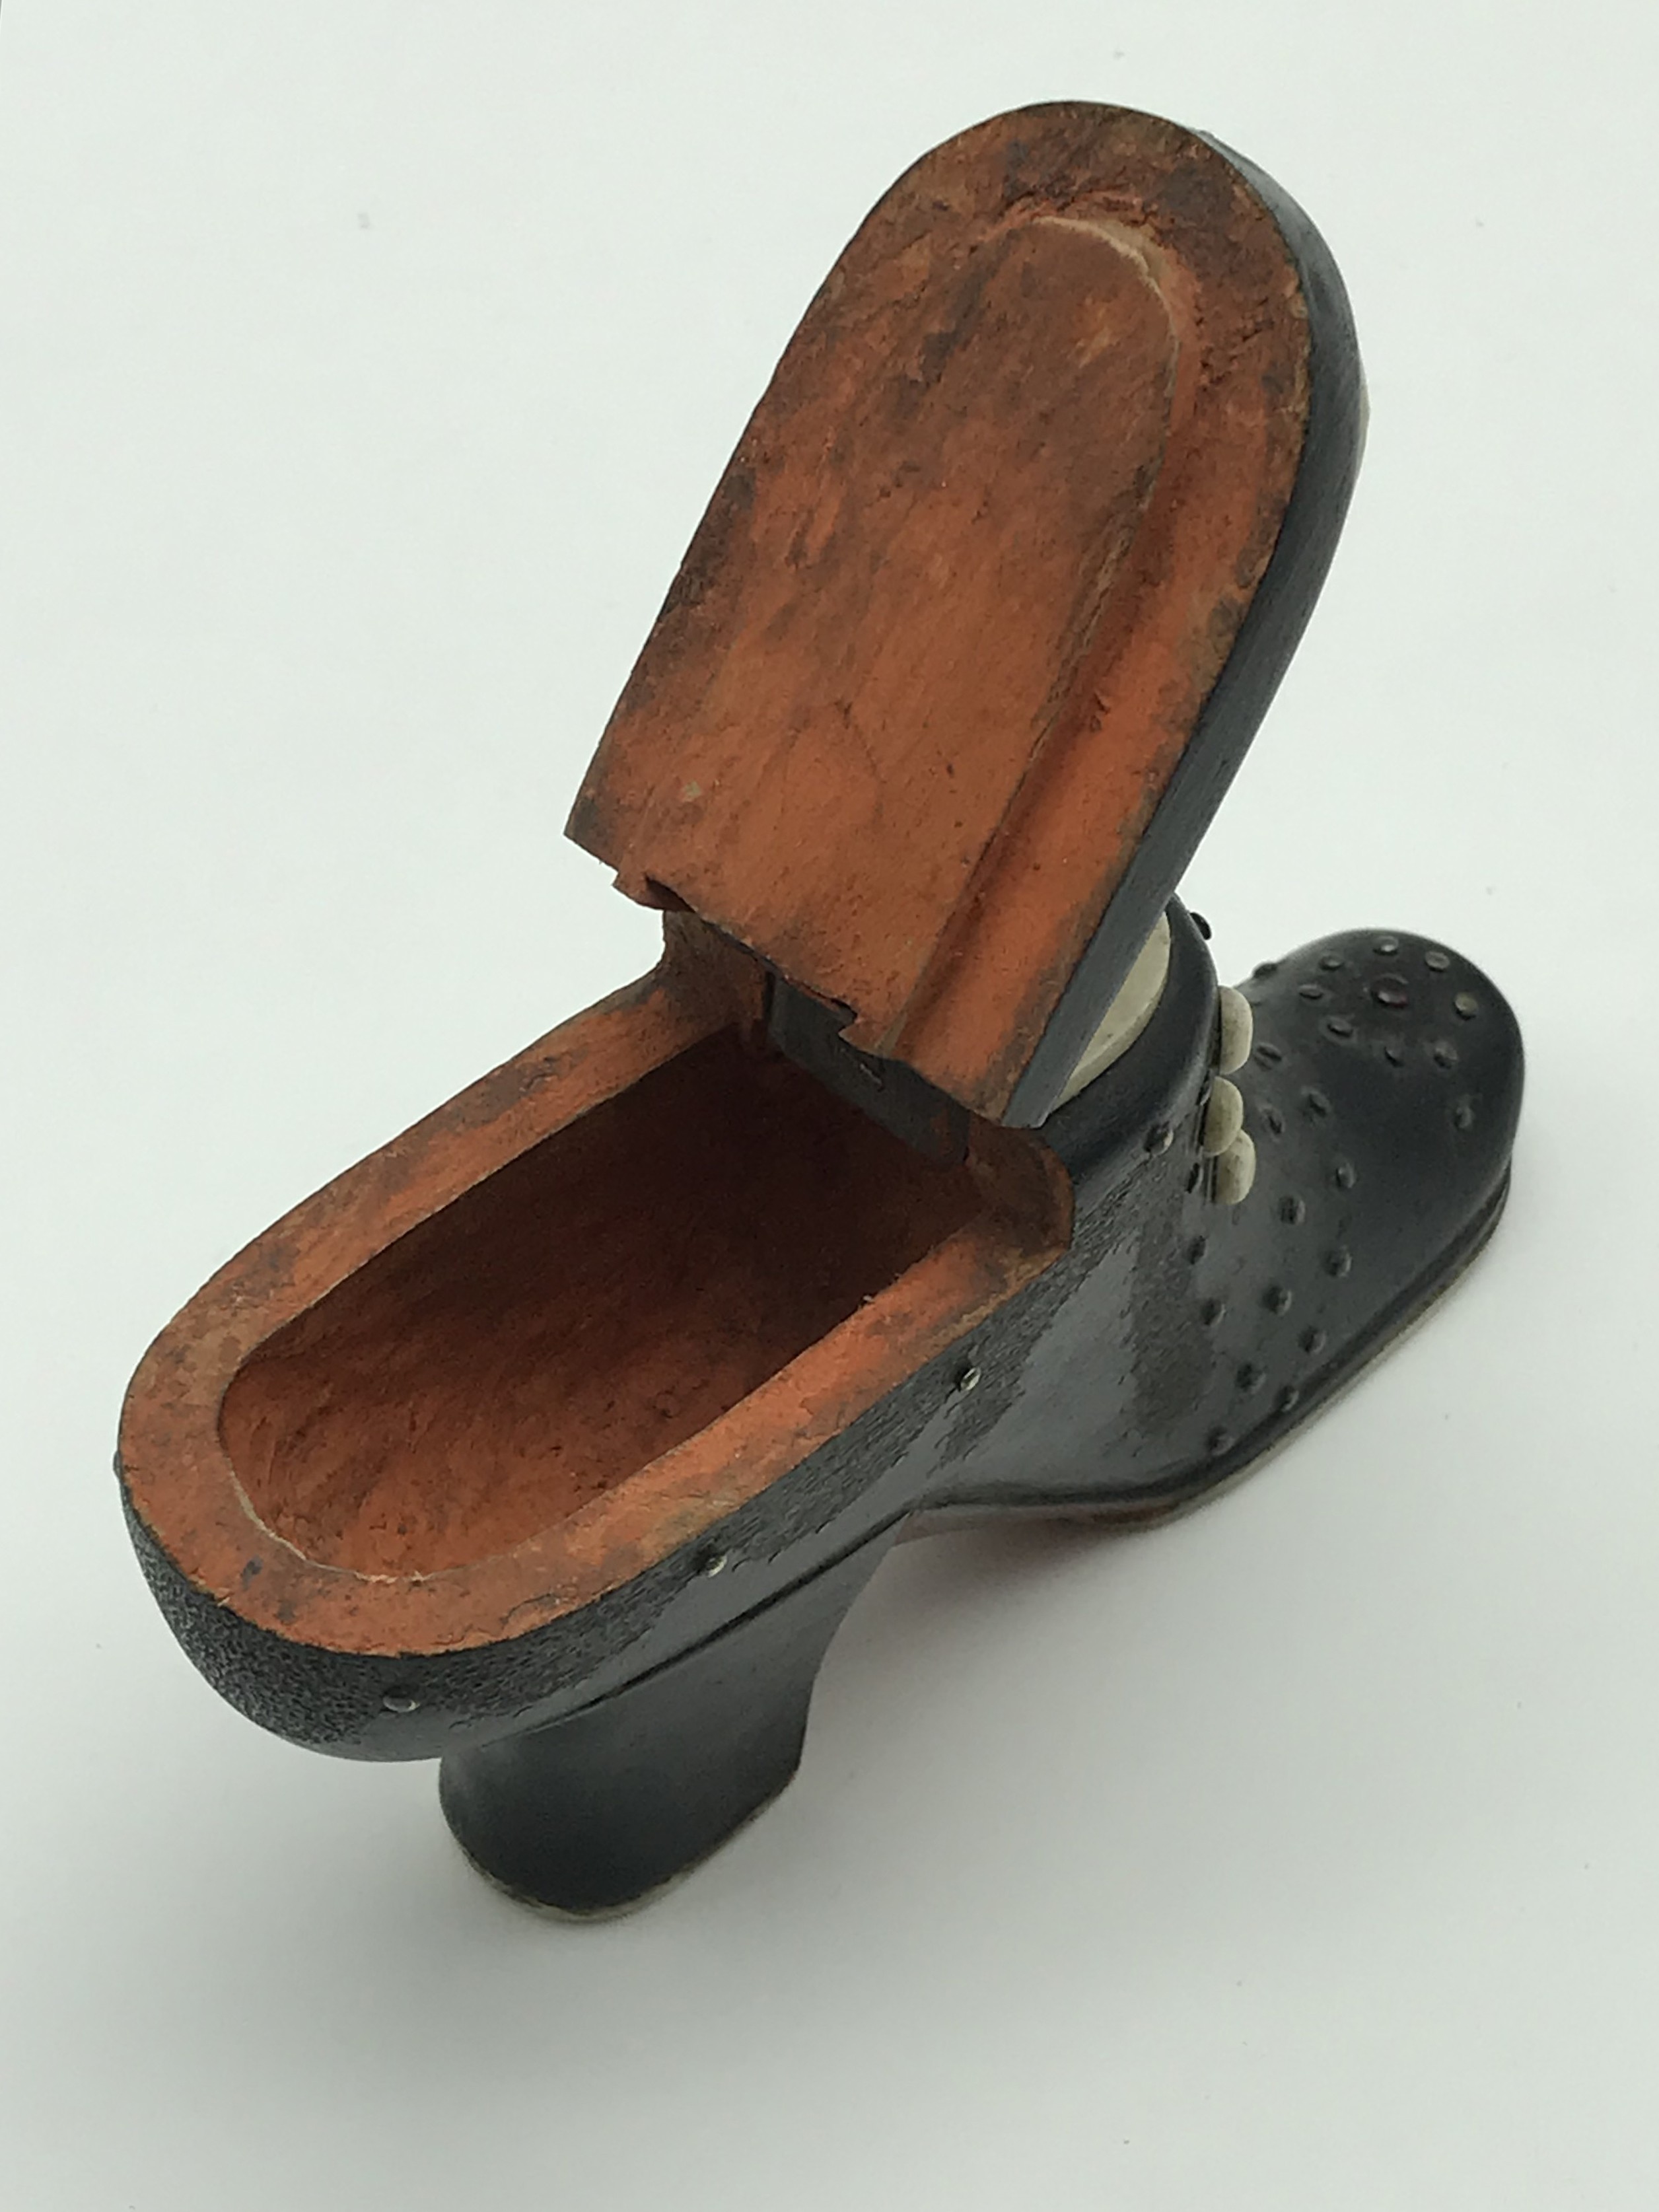 WOODEN SHOE SNUFF BOX - Image 8 of 9